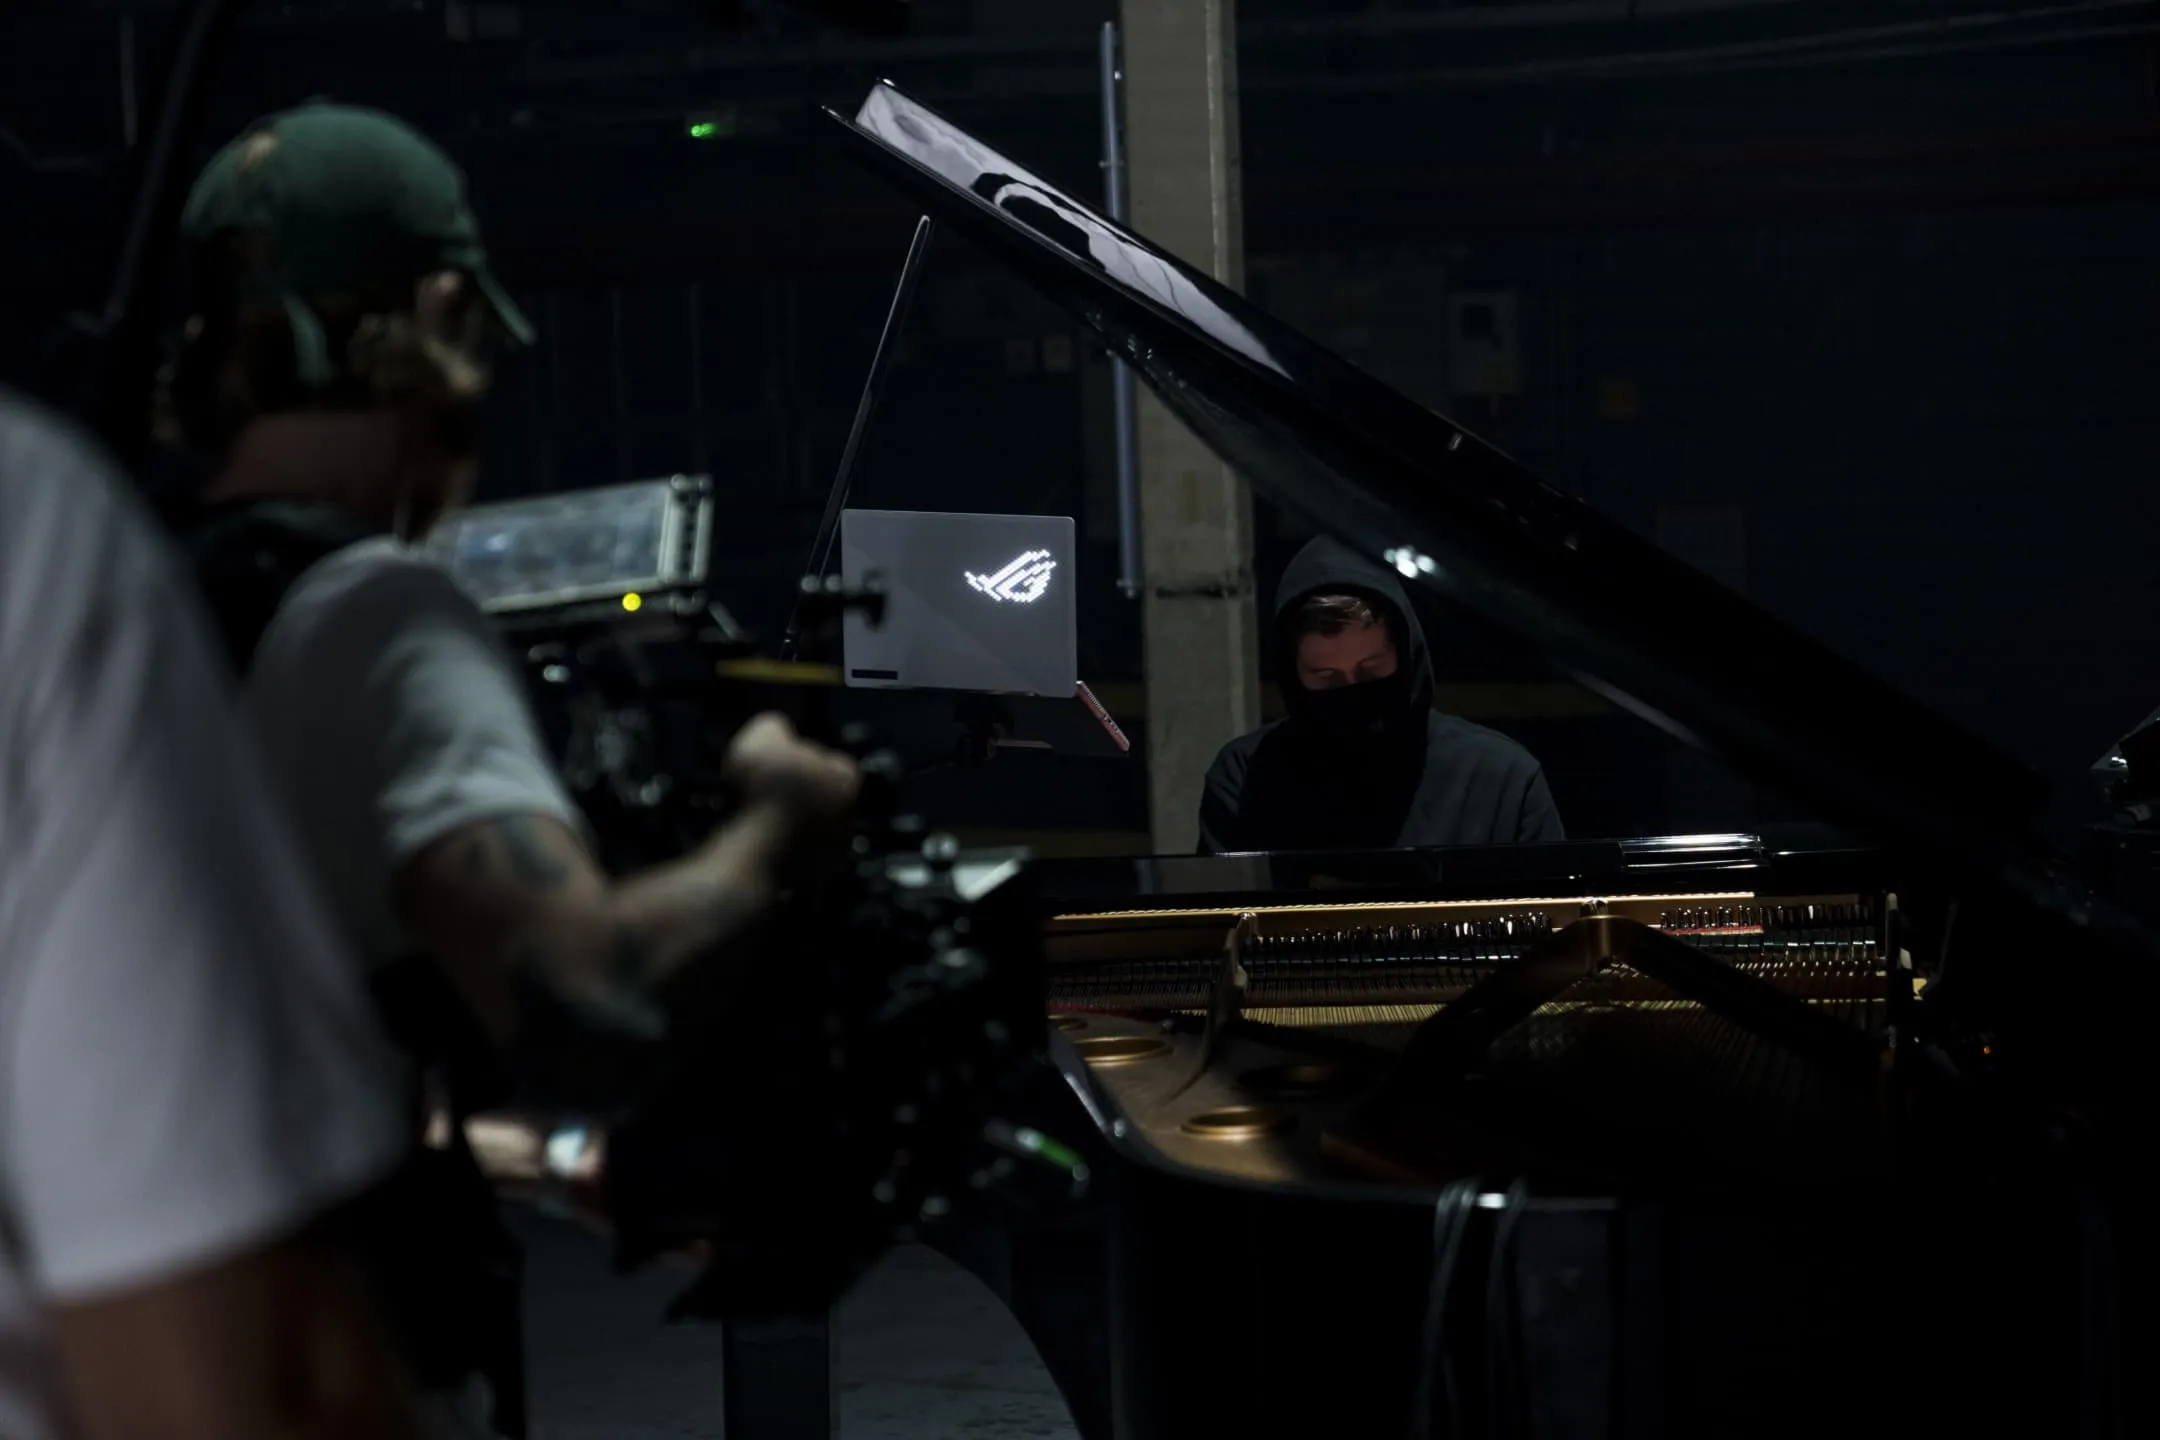 Alan Walker seated at a piano, with the Zephyrus G14 open nearby, and both being filmed by a camera crew in a warehouse.